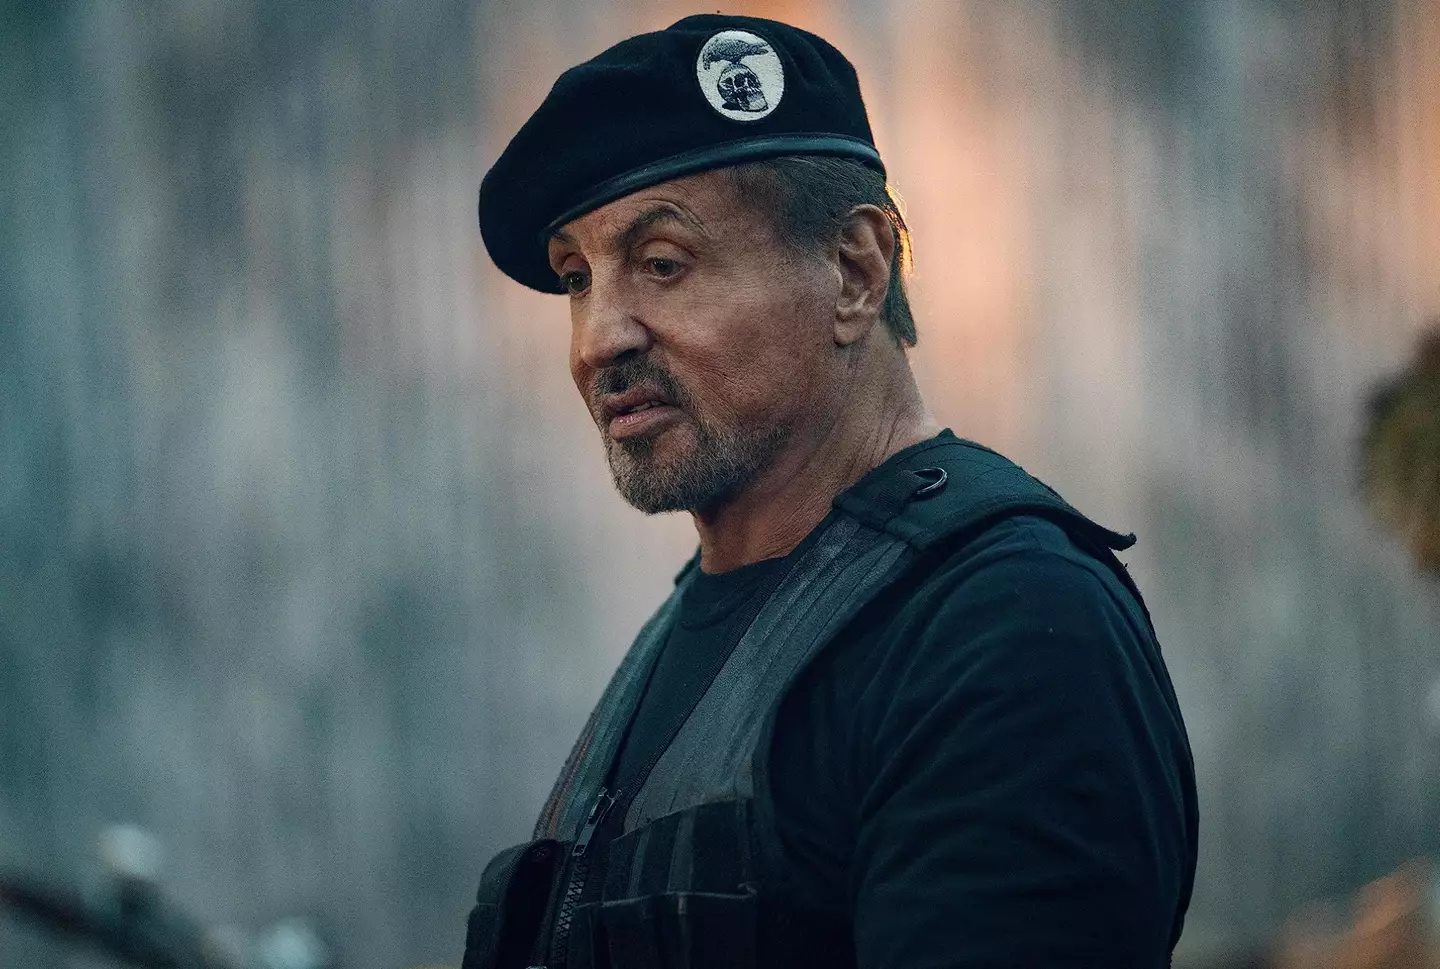 Sylvester Stallone is back for the fourth installment of The Expendables.